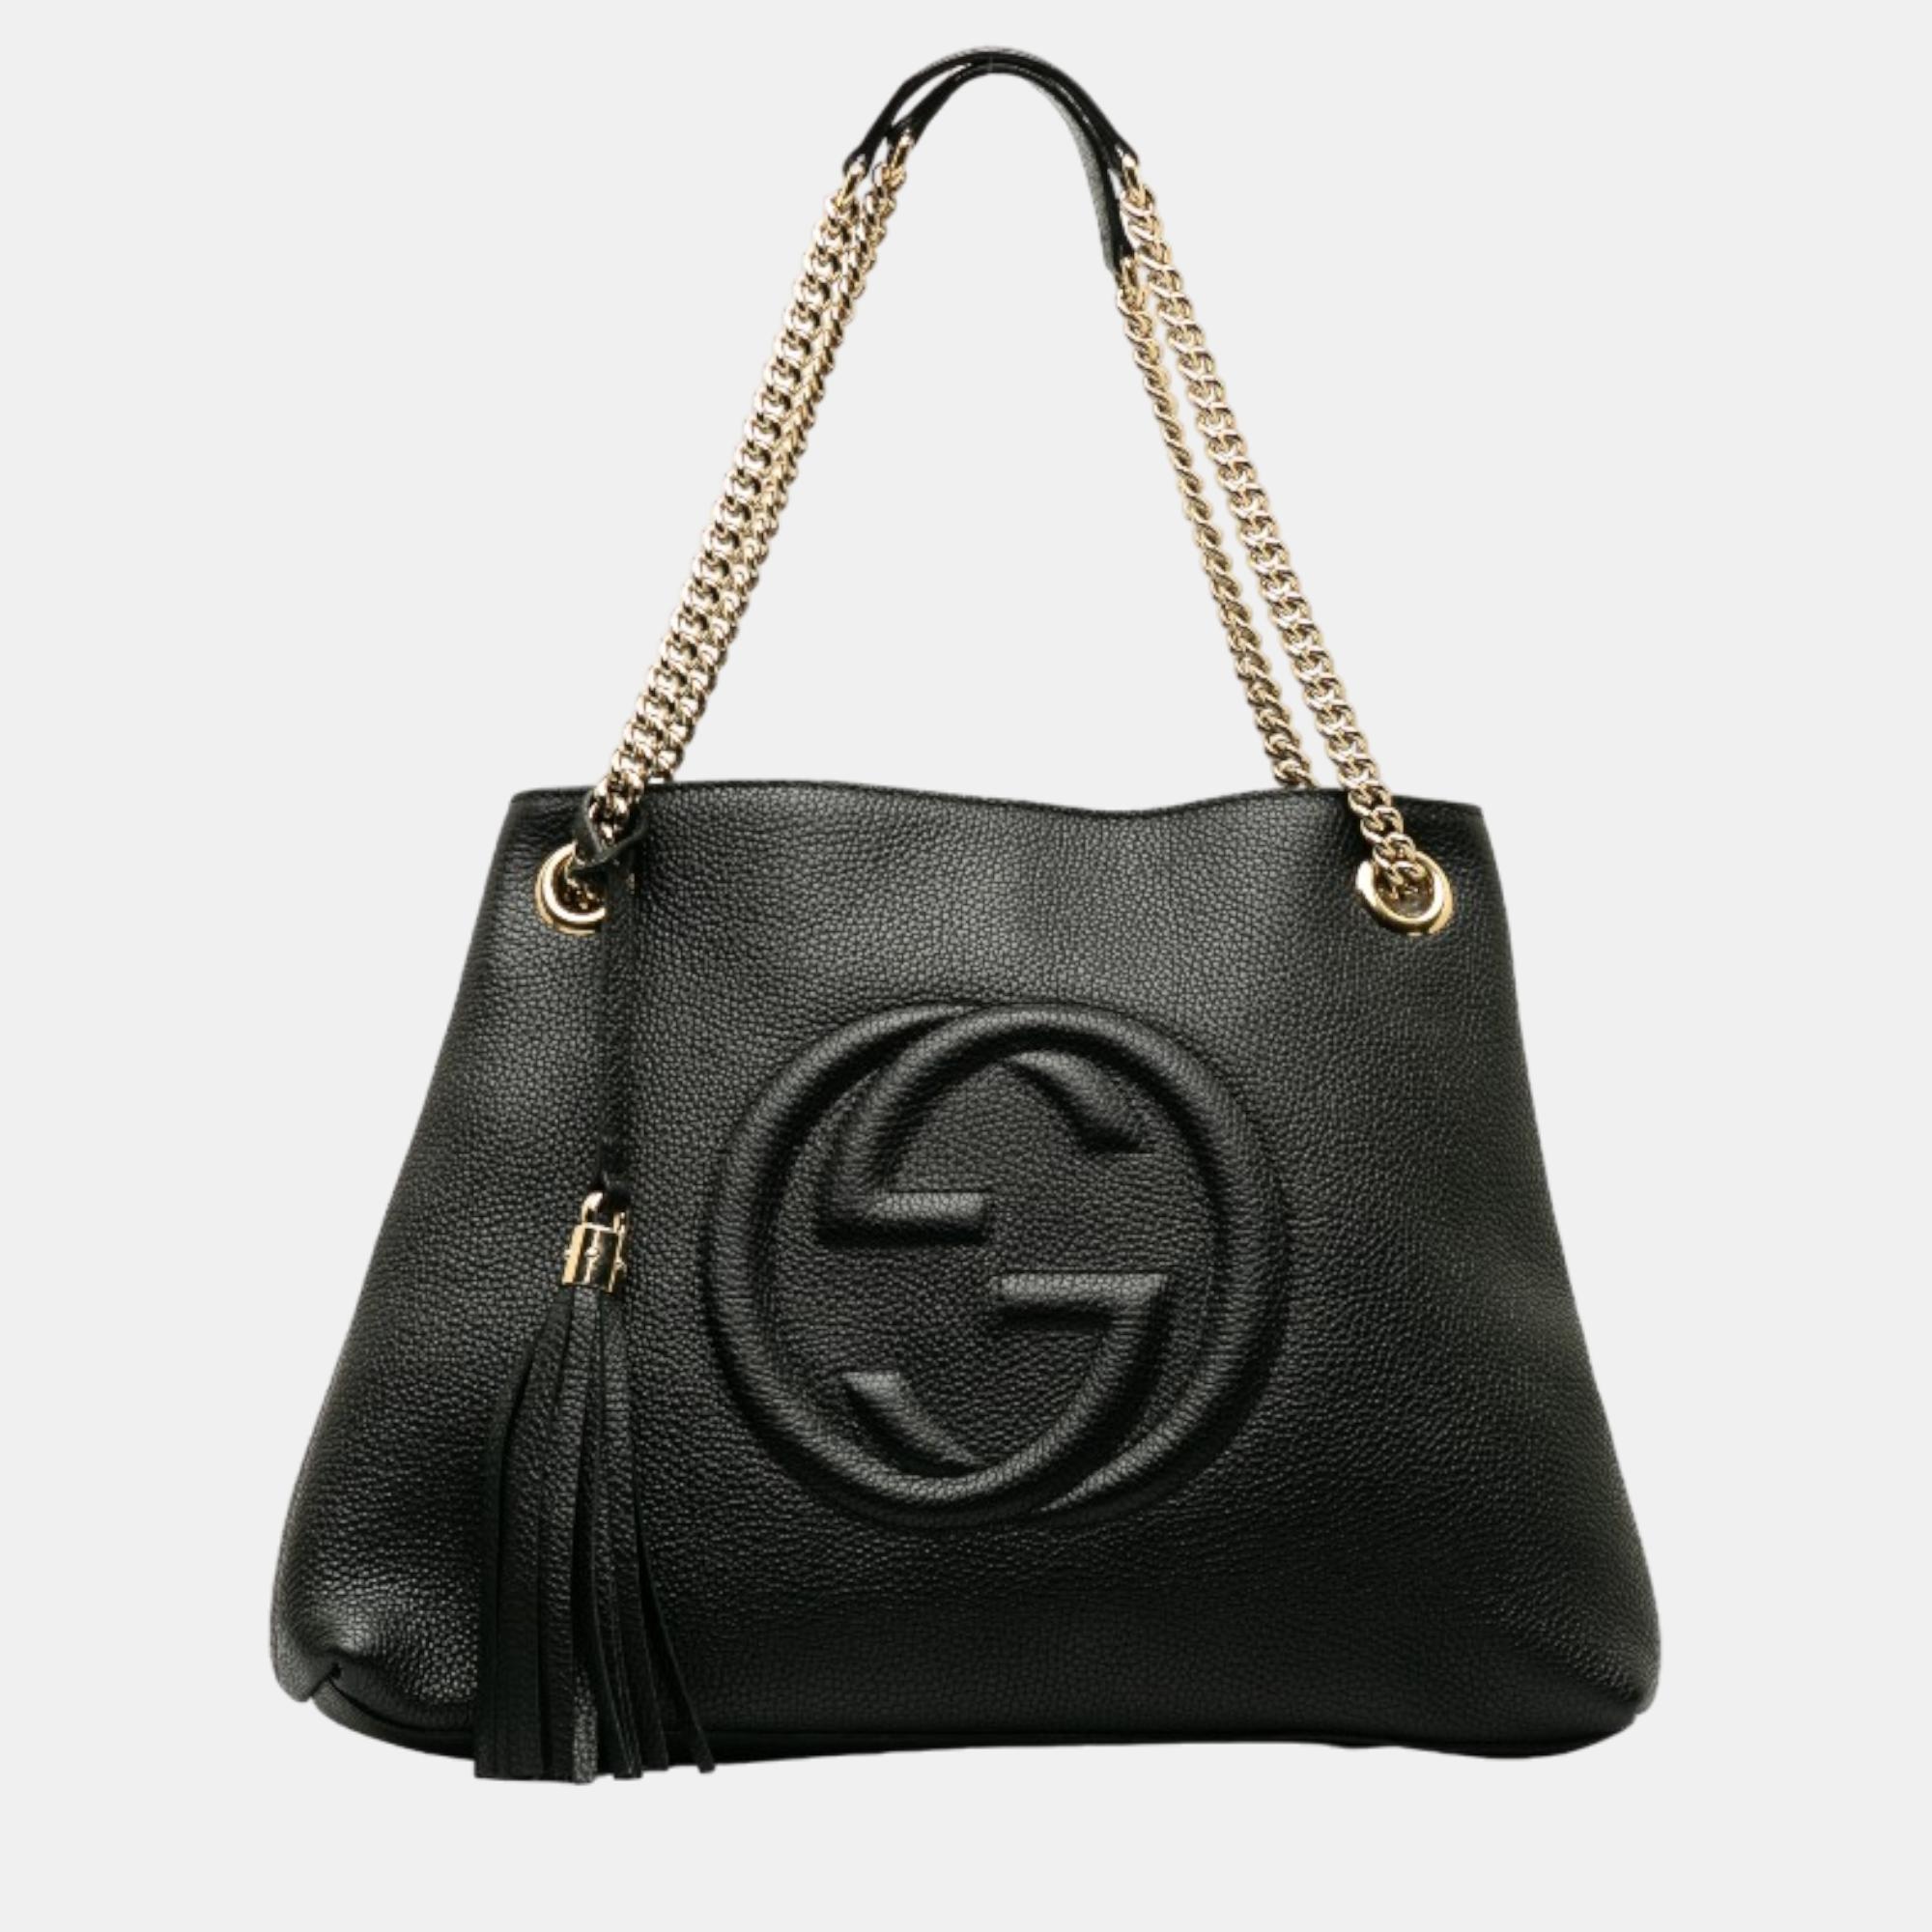 Pre-owned Gucci Black Leather Small Soho Chain Tote Bag